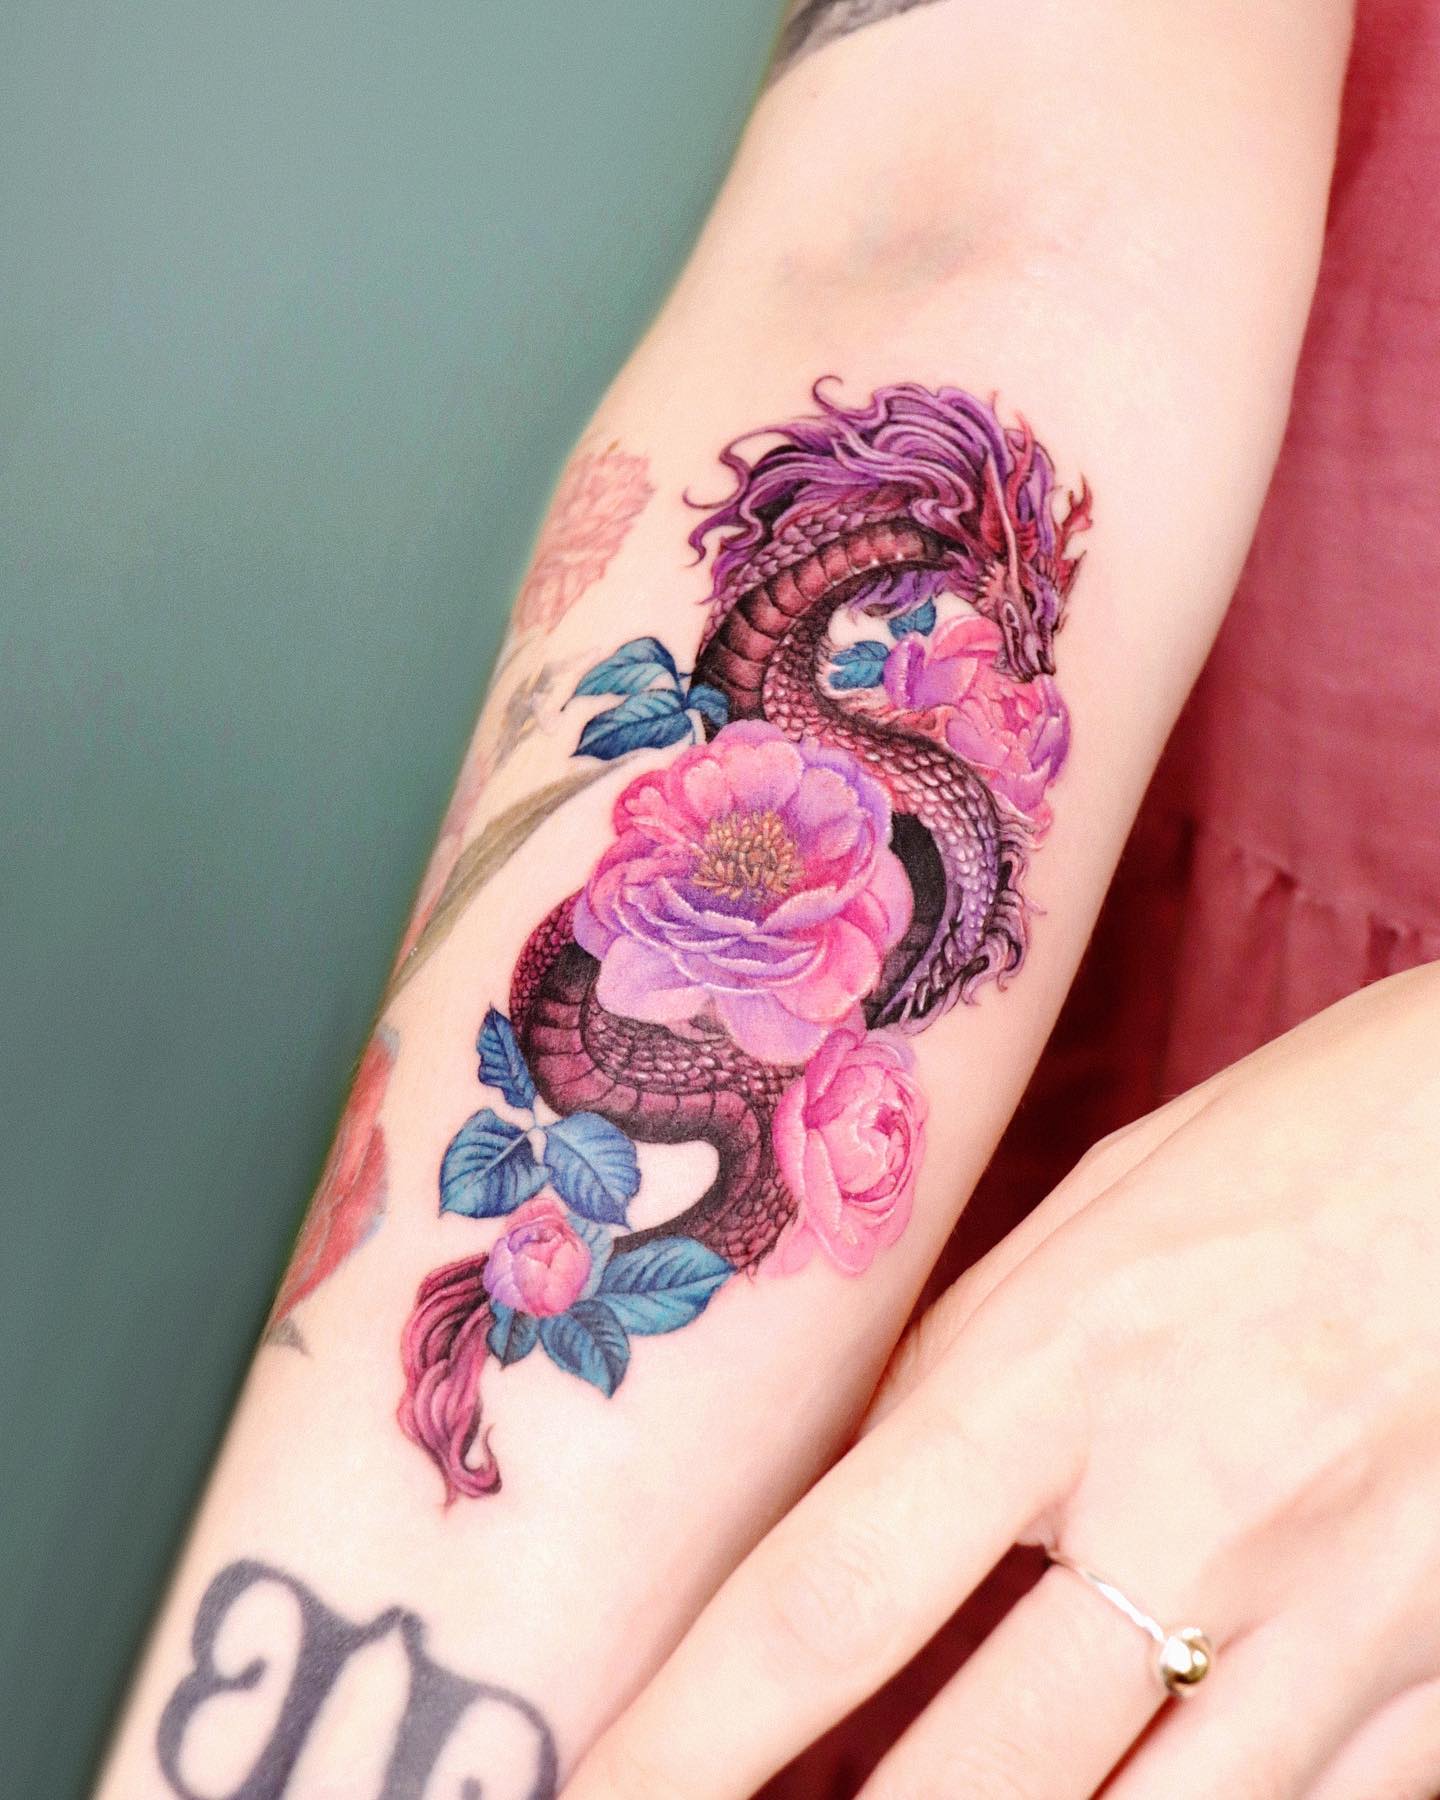 Colorful Chinese Dragon Tattoo on Arm